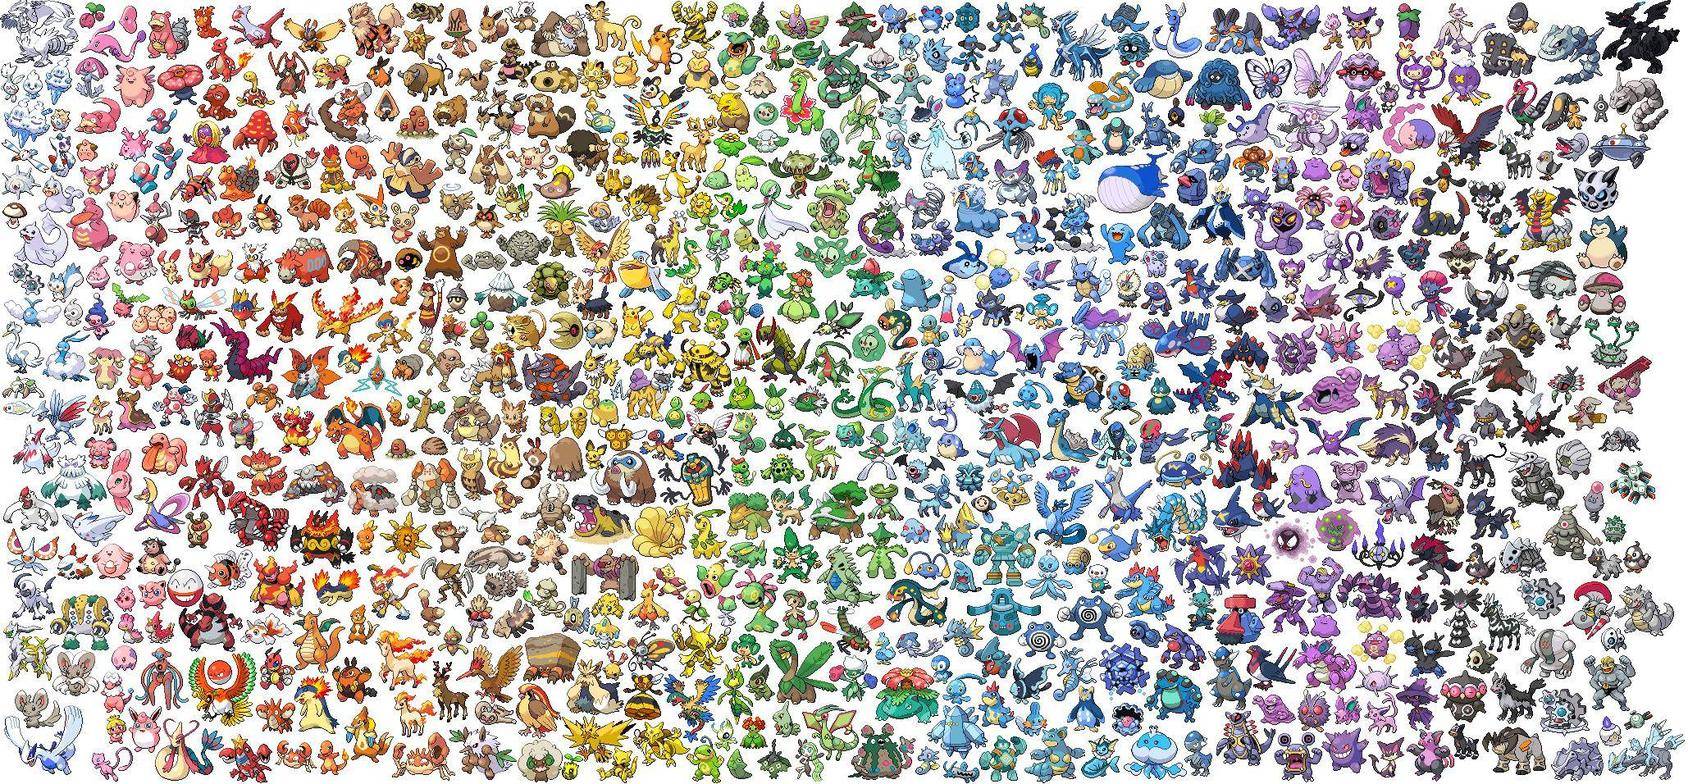 A Poke rainbow for you all gaming